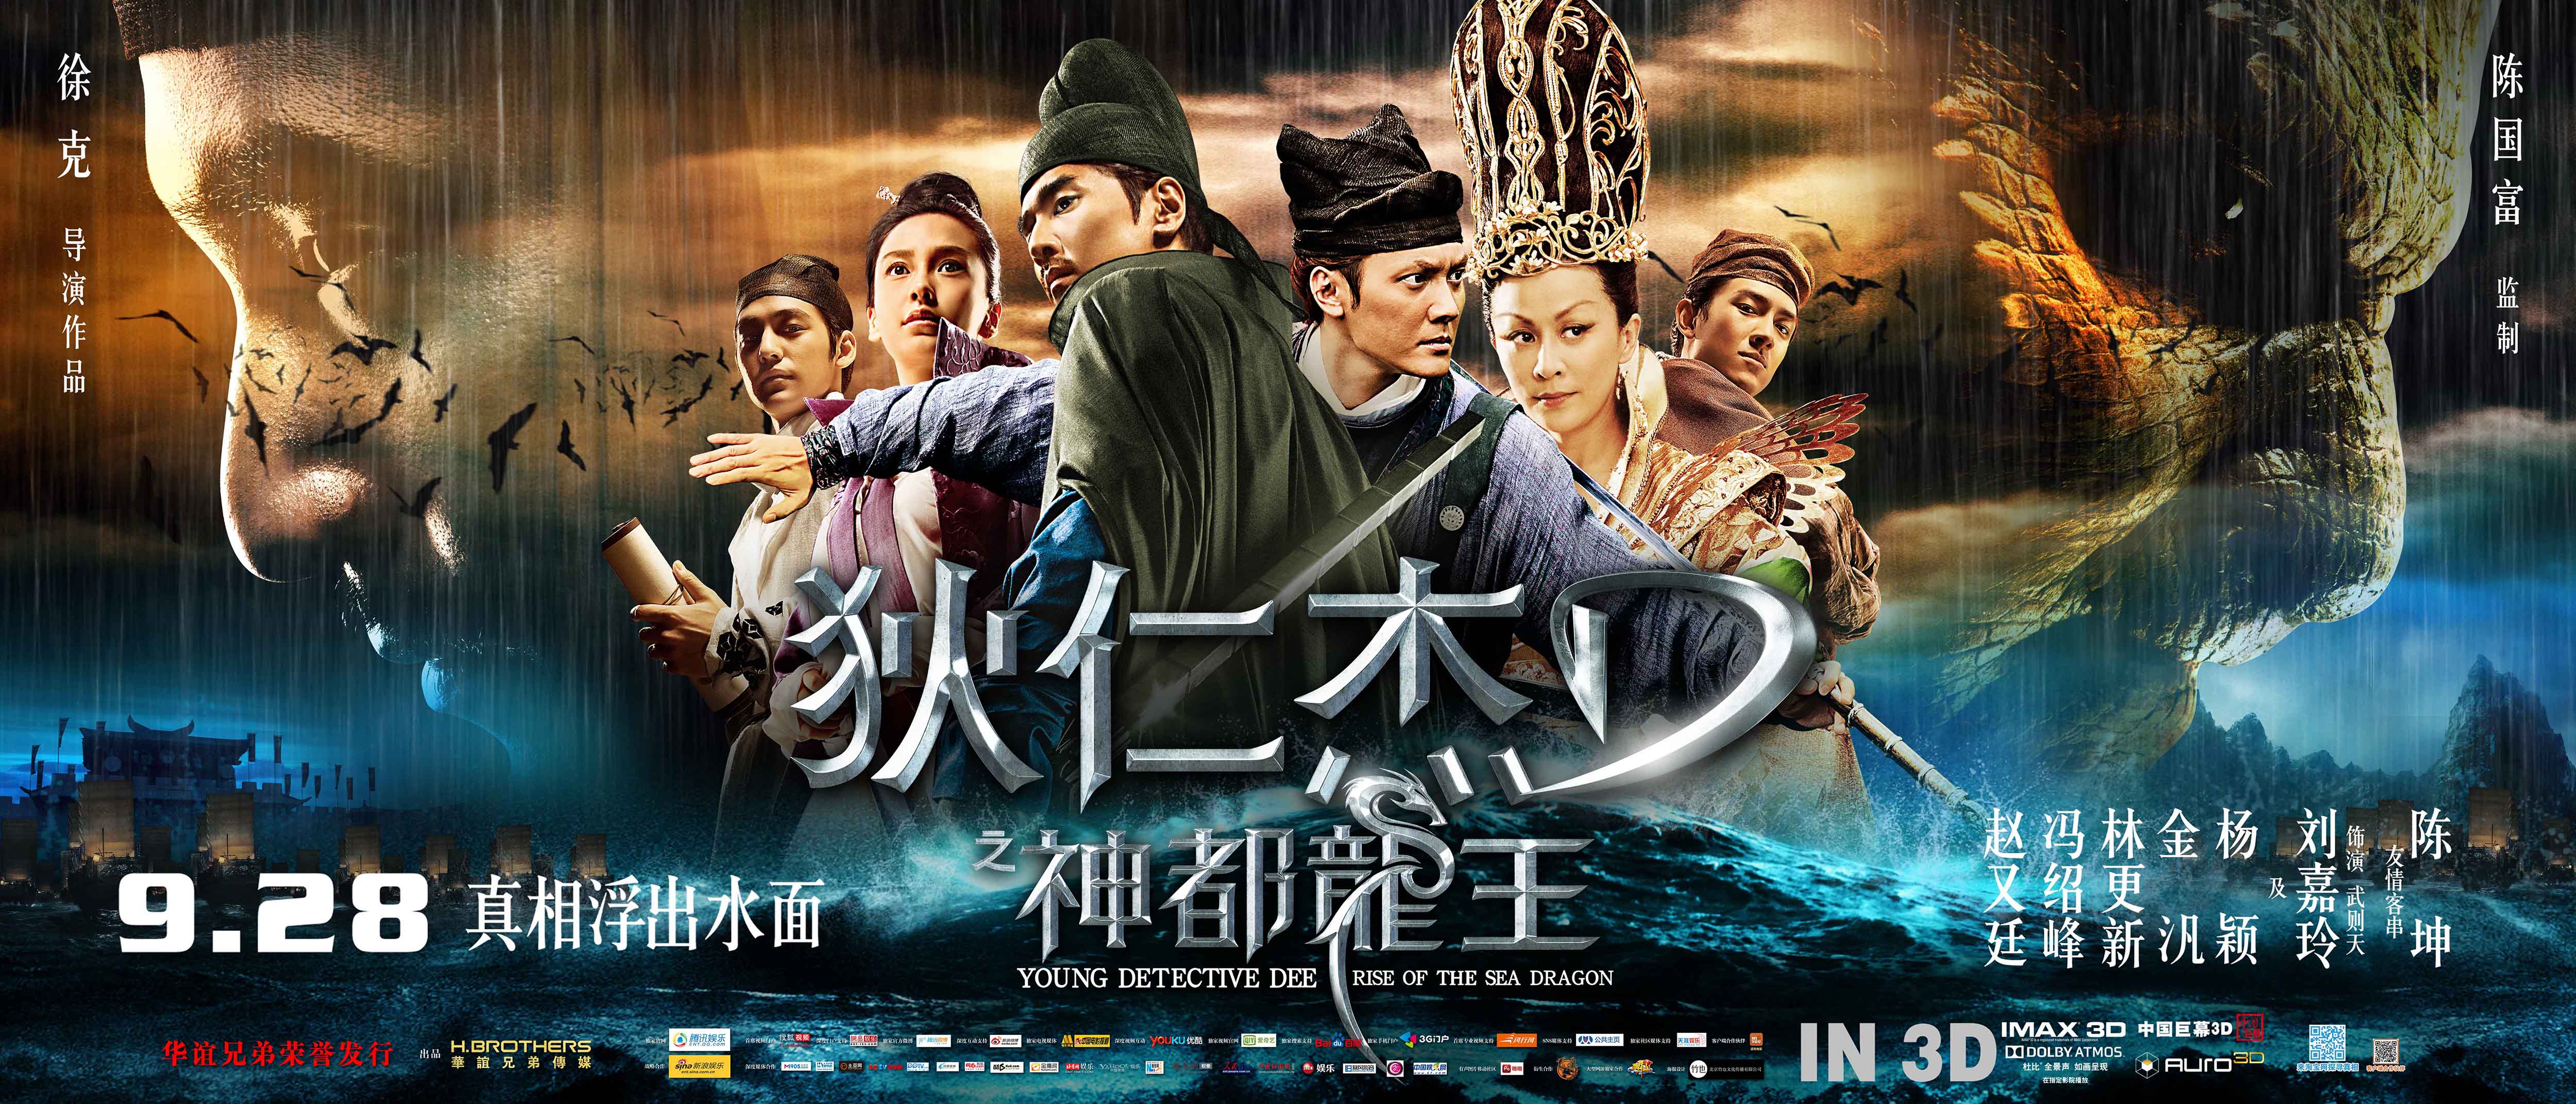 Young Detective Dee: Rise Of The Sea Dragon Pics, Movie Collection